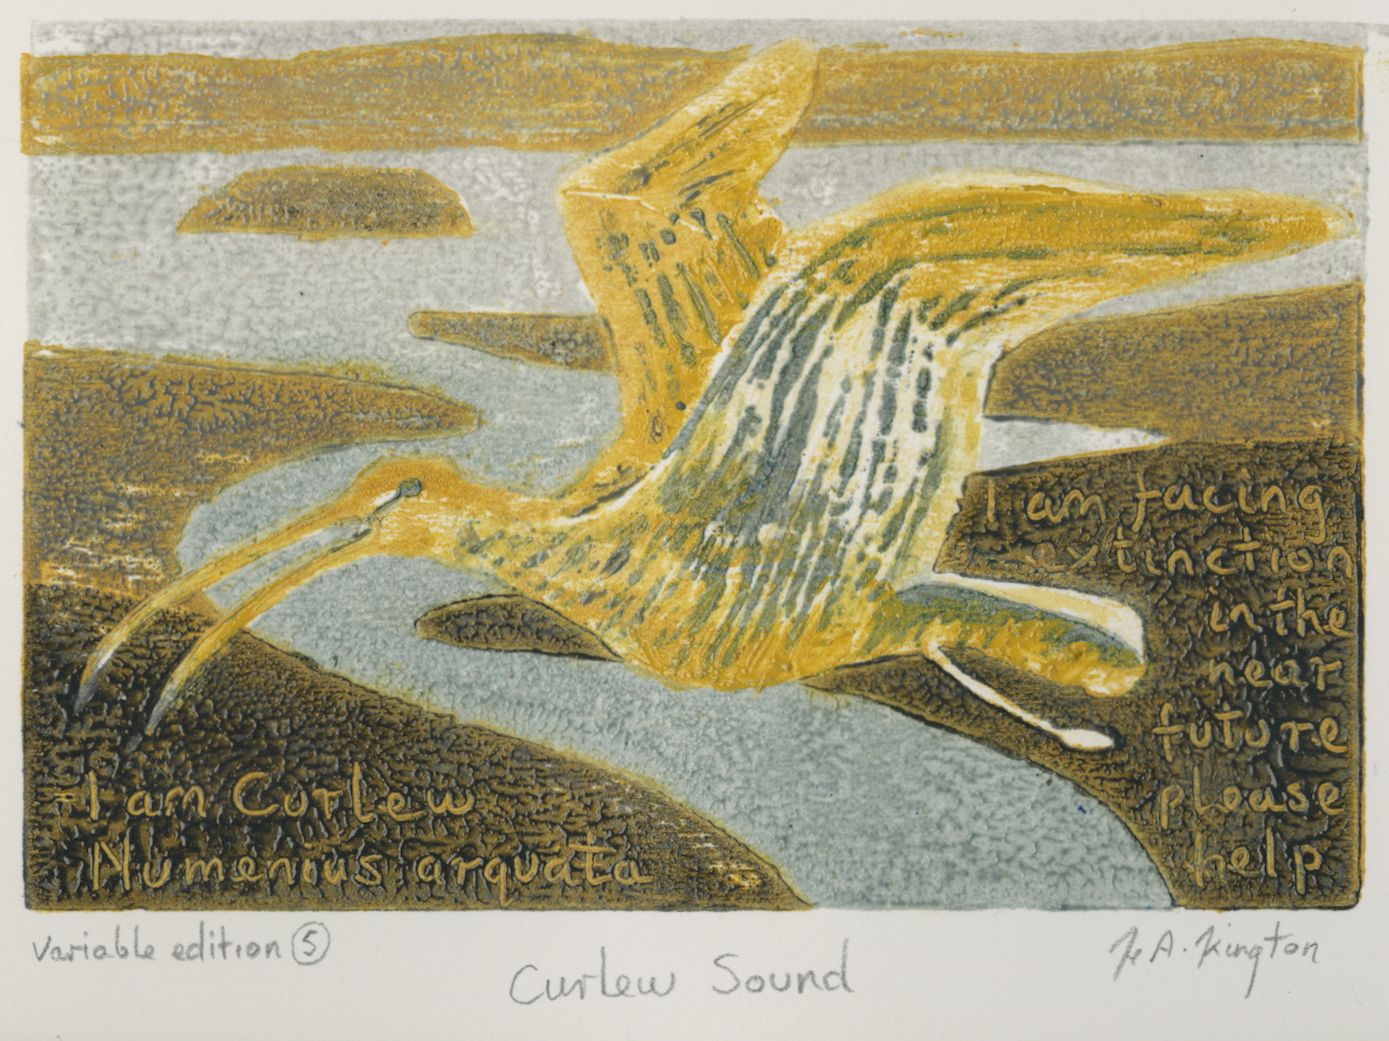 Curlew Sound 5 by Hilary Kington